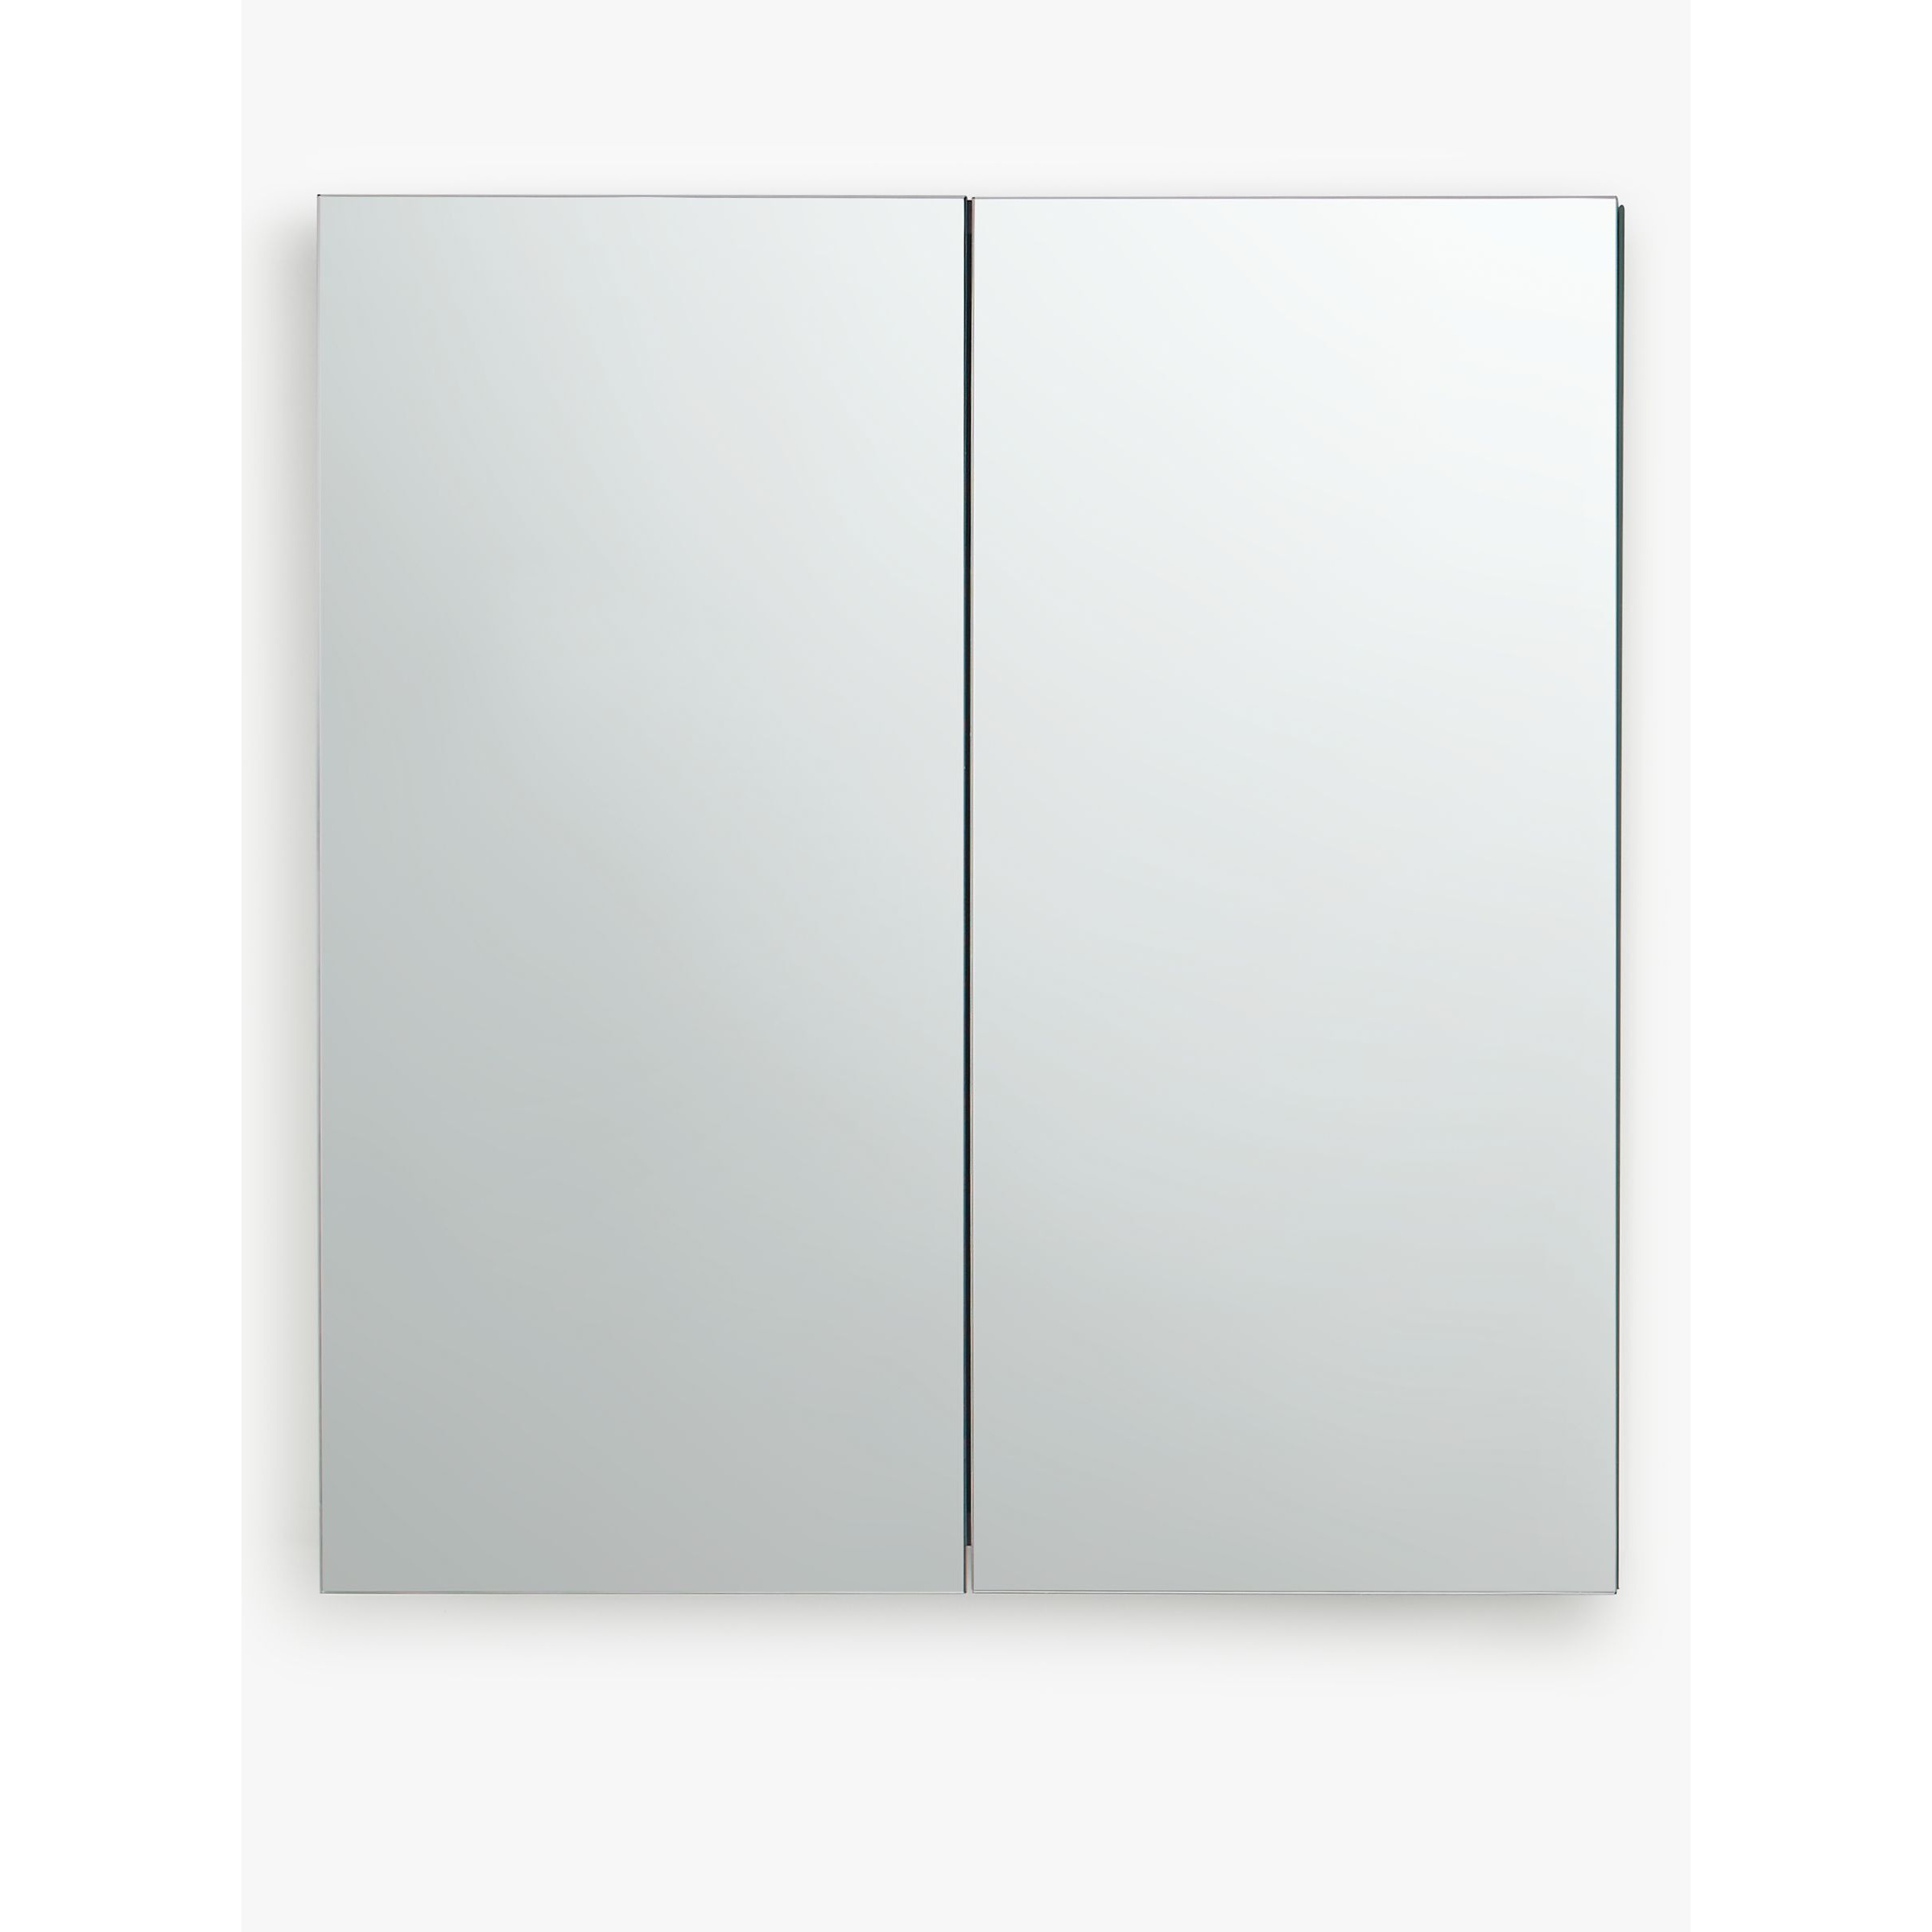 John Lewis Small Double Mirror-Sided Bathroom Cabinet